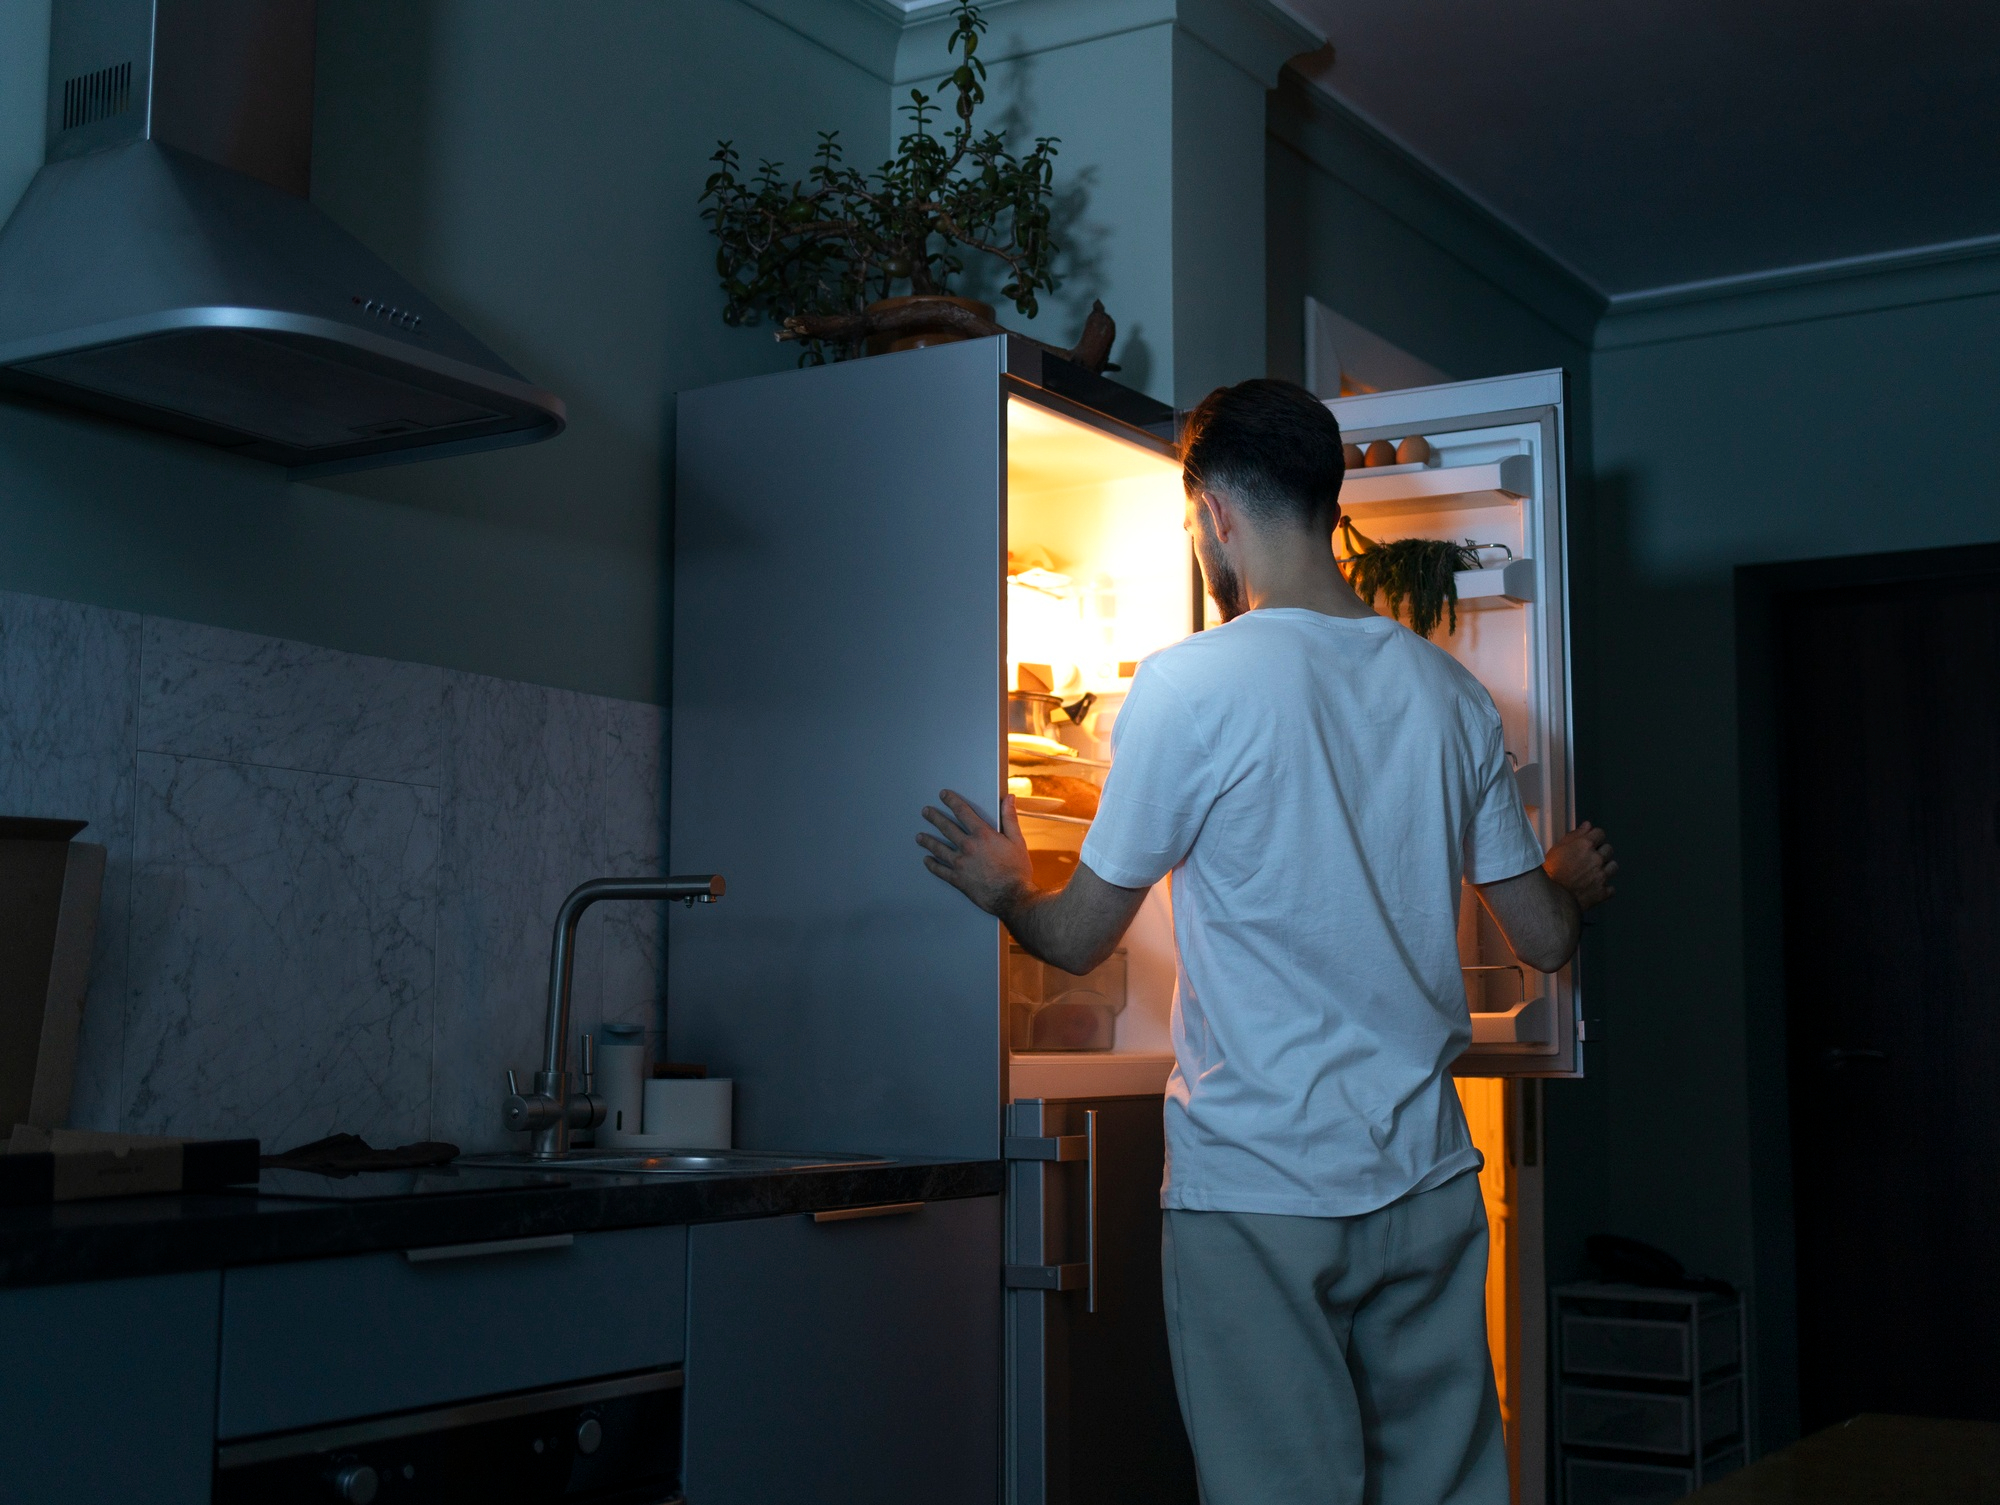 A man looking for snacks in the fridge | Source: Freepik